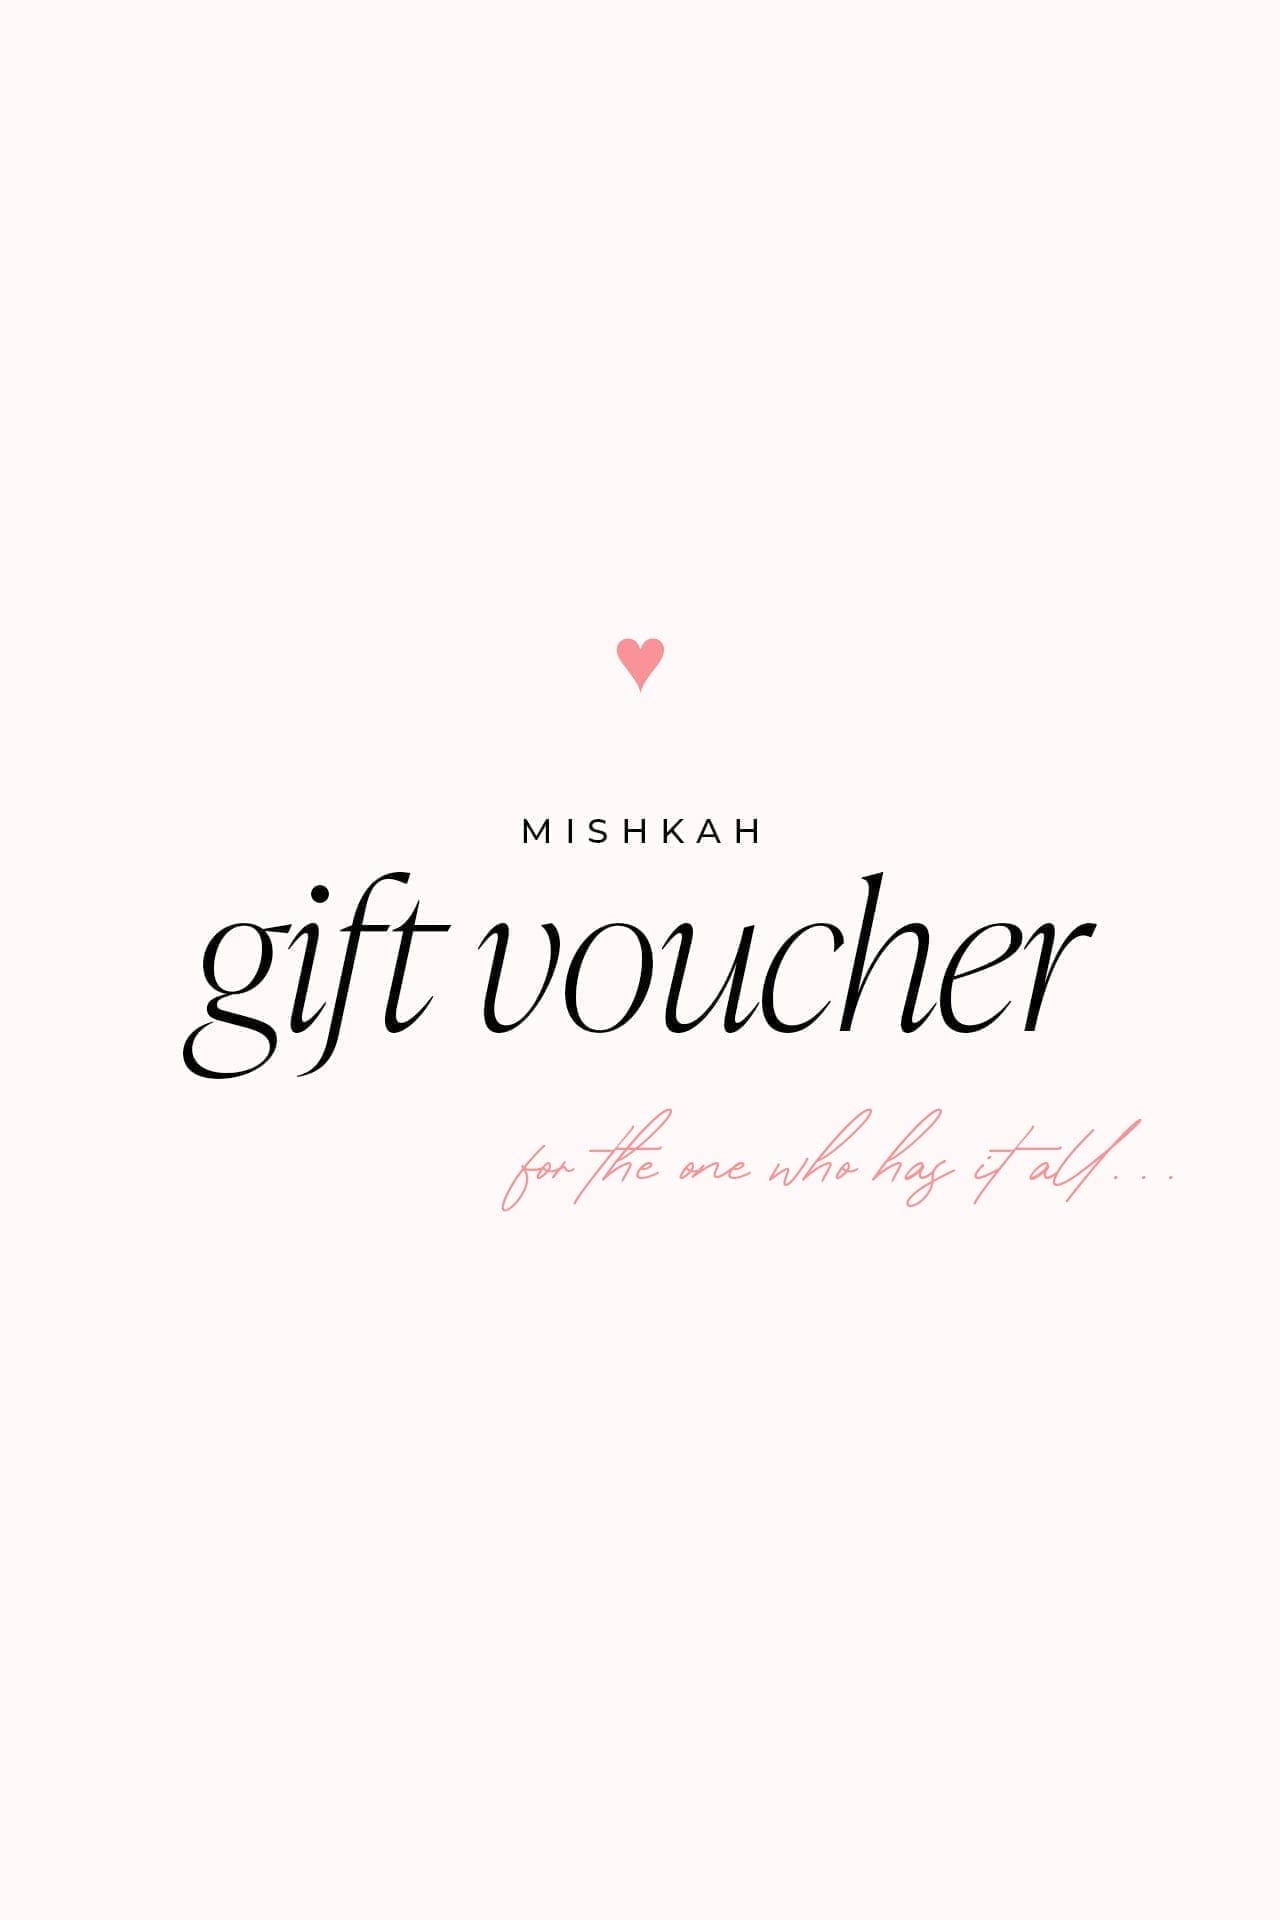 Gift Card From Only $25.00 For That Special Girl - MISHKAH